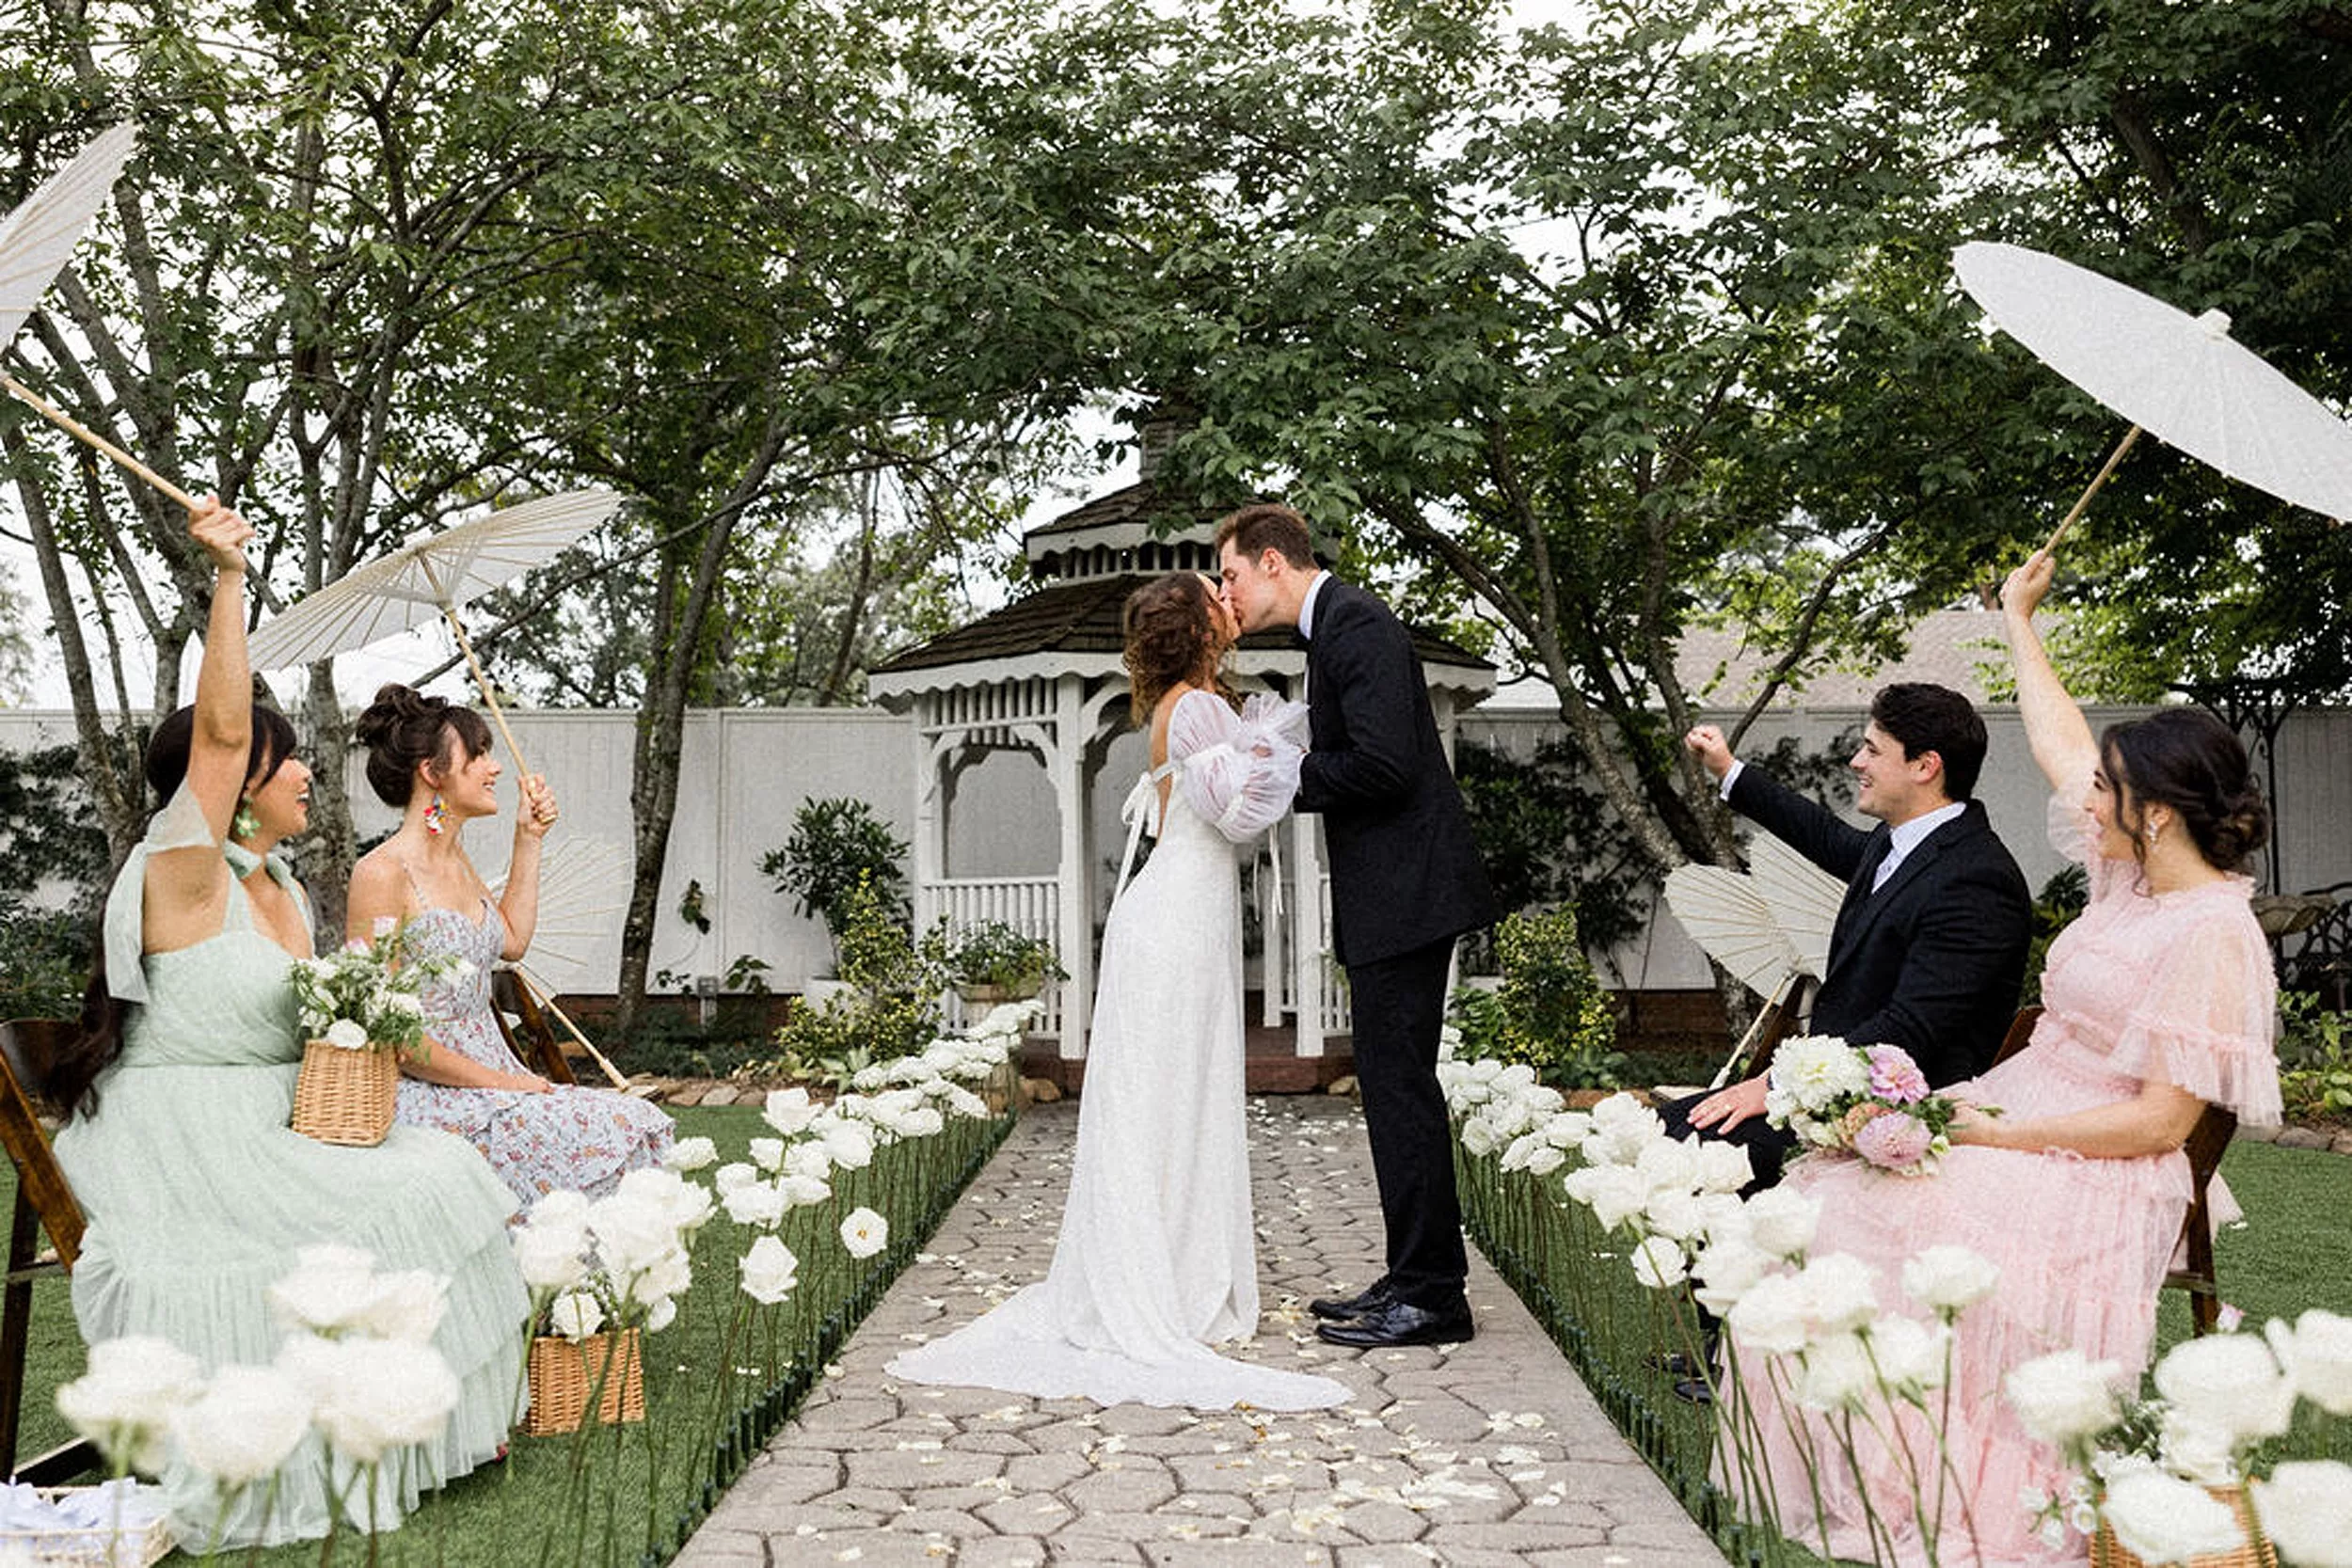 Newlyweds kiss while standing in the stone aisle of a garden wedding ceremony as their guests cheer while holding umbrellas